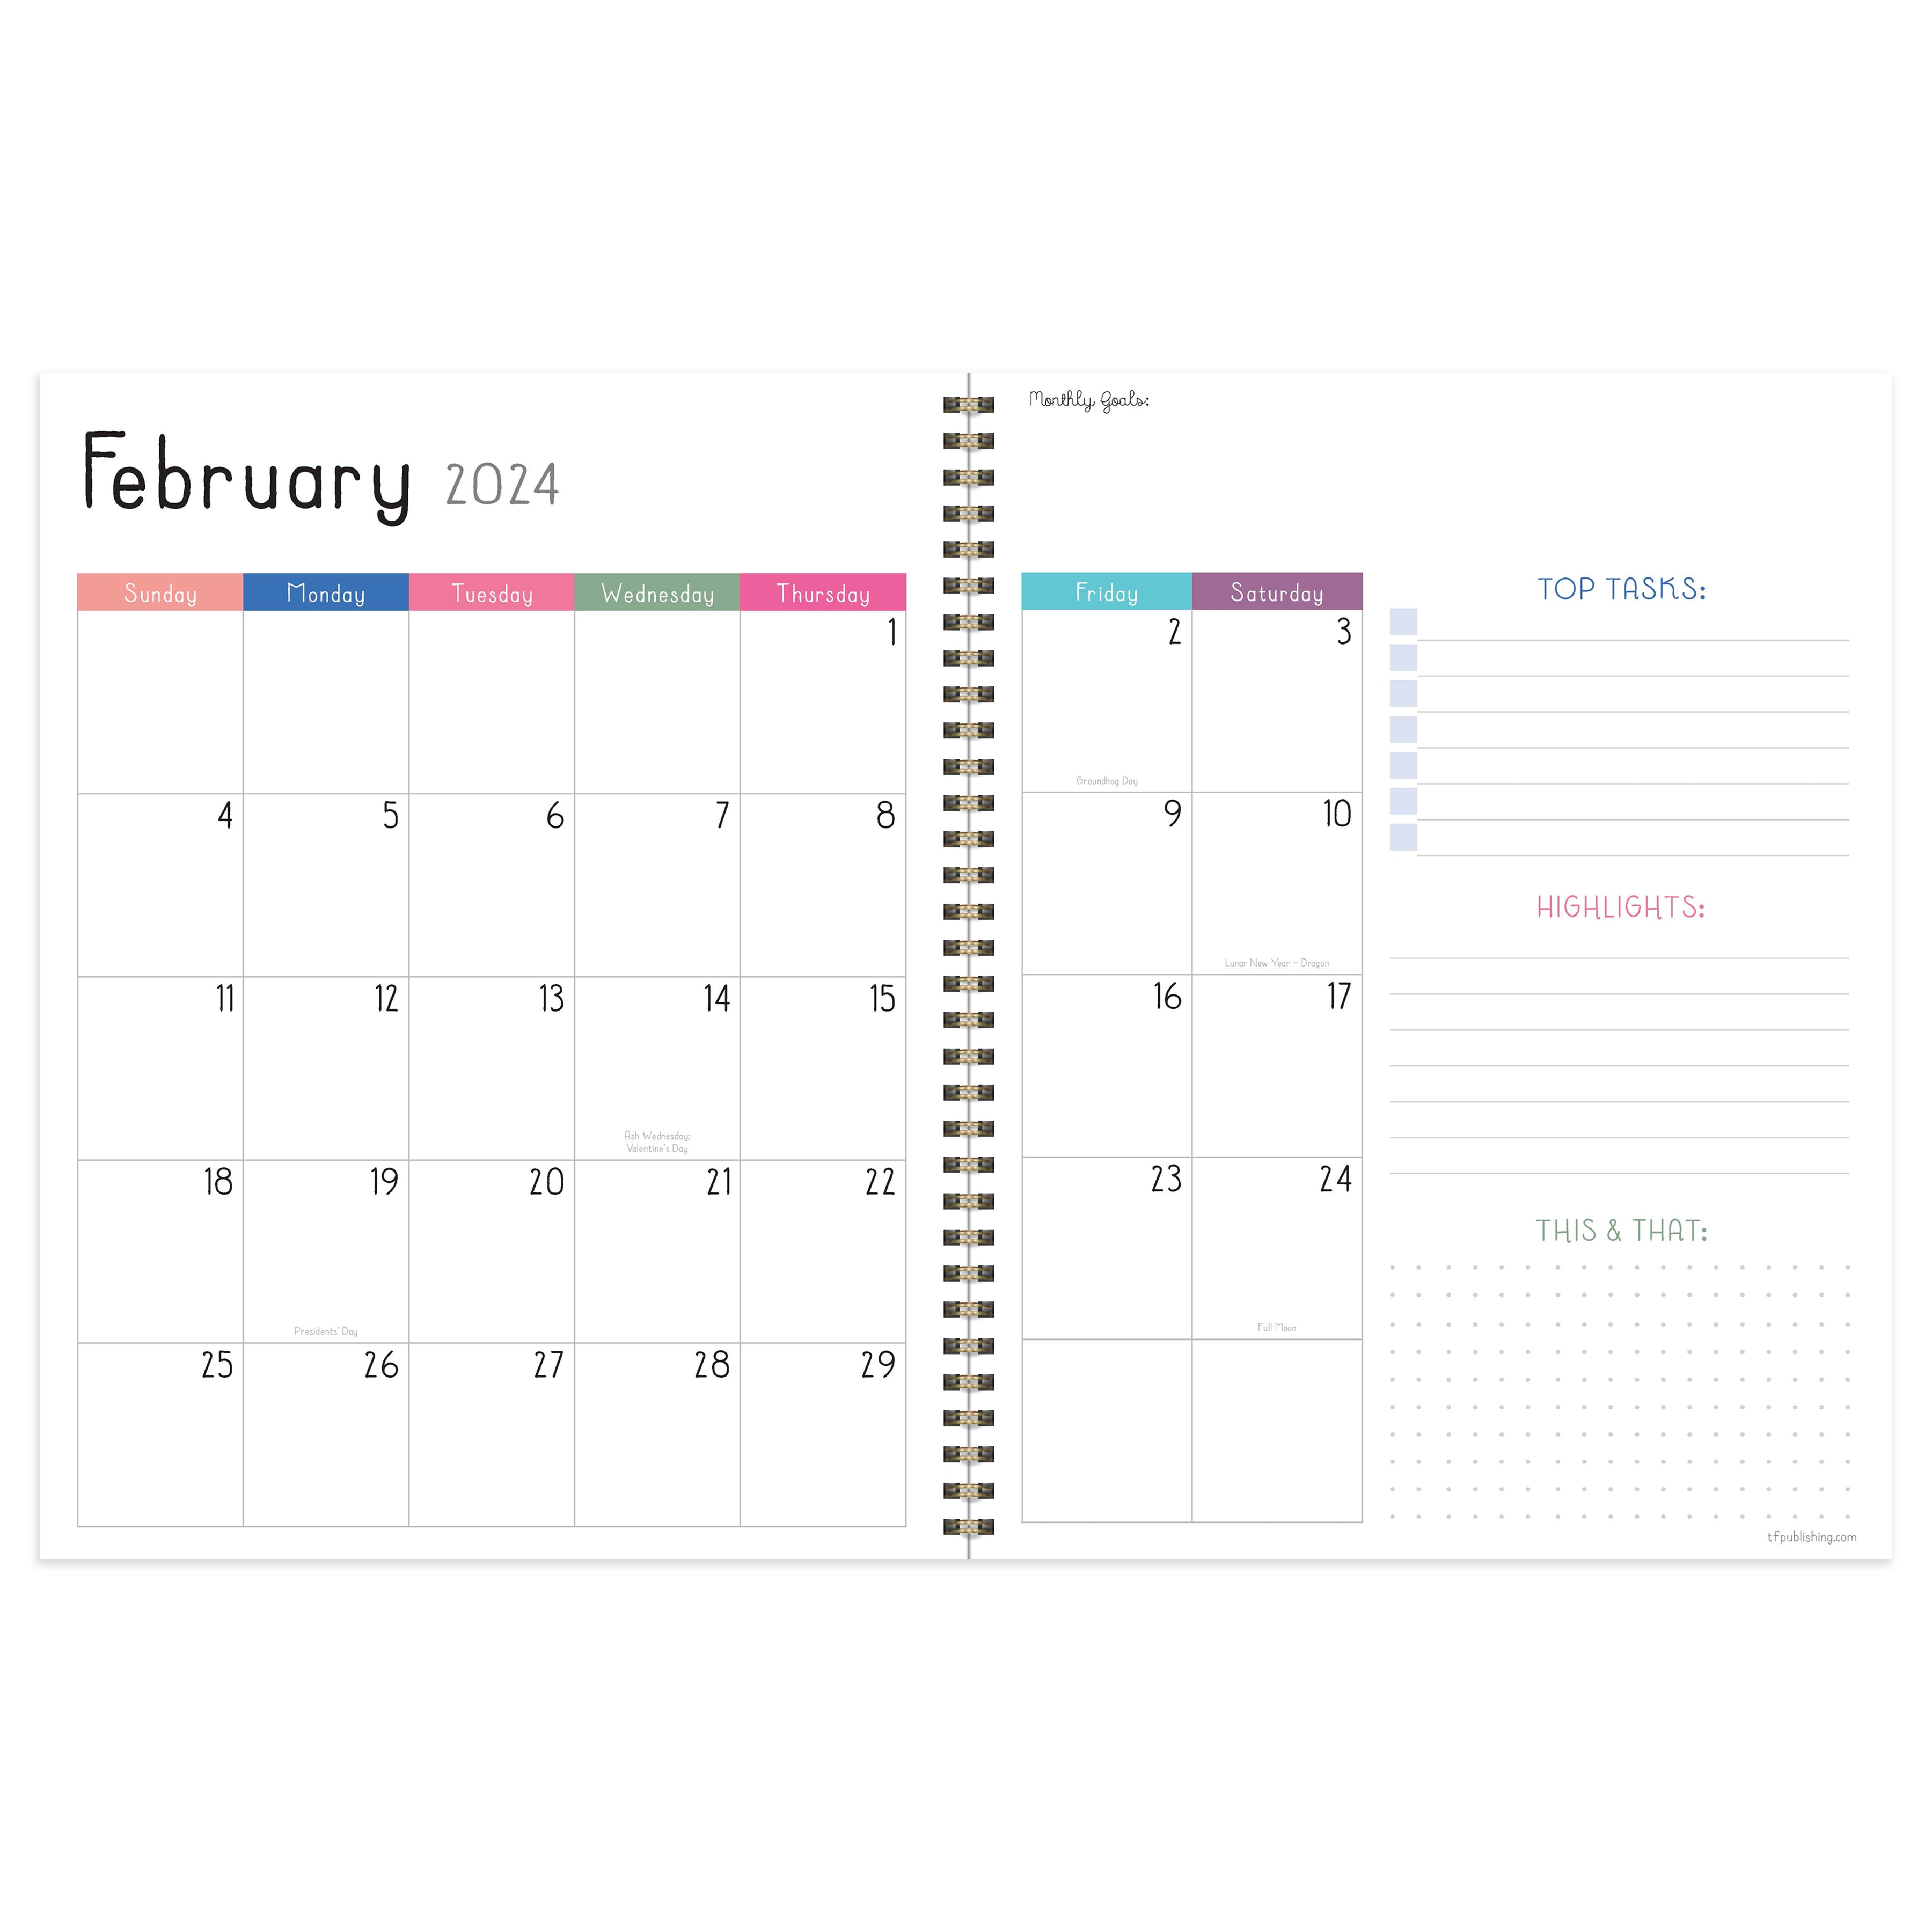 2024 All the Flowers - Large Weekly, Monthly Diary/Planner